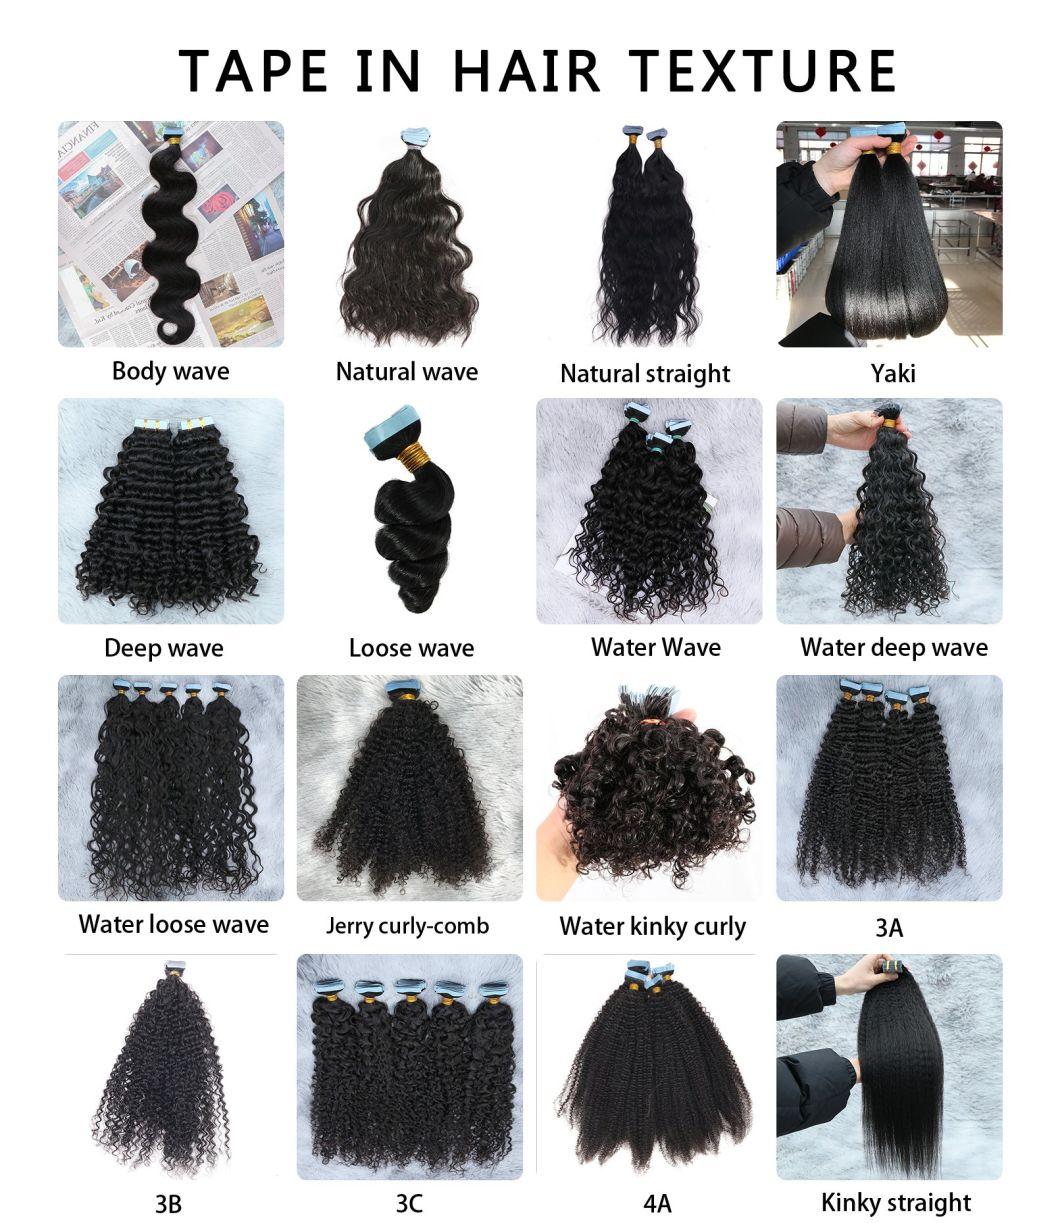 Wholesale Cuticle Aligned Kinky Curly Virgin Unprocessed Human Hair Extension